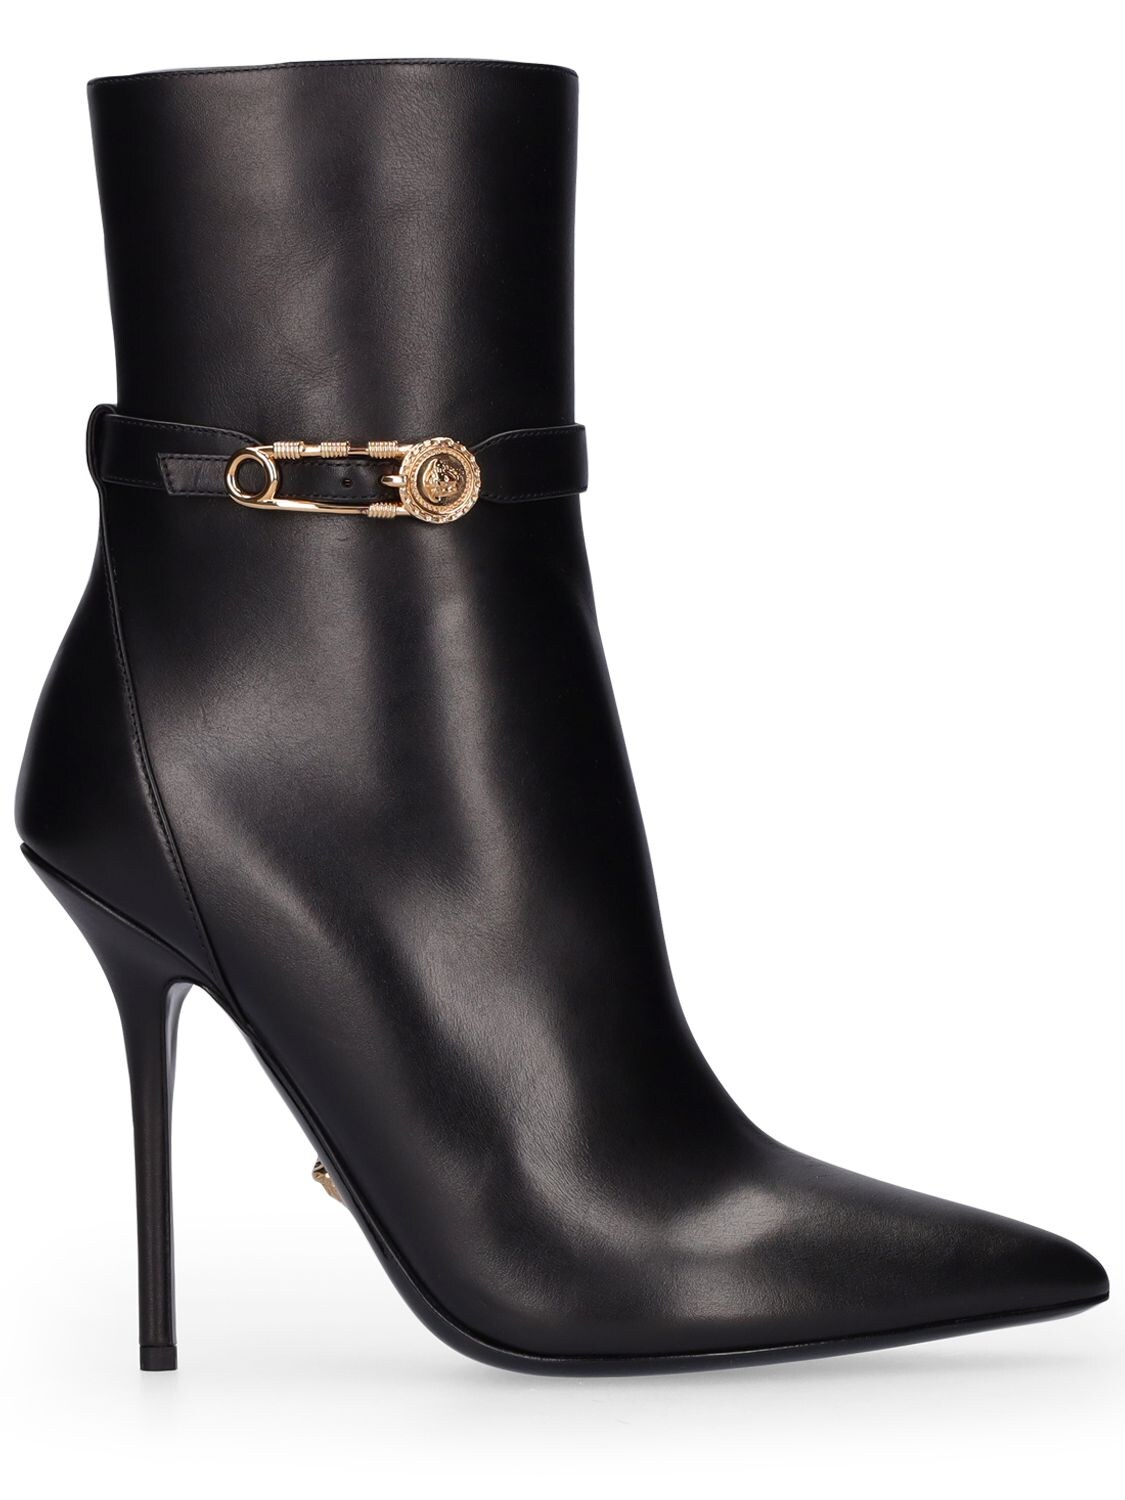 VERSACE 110mm Leather Ankle Boots